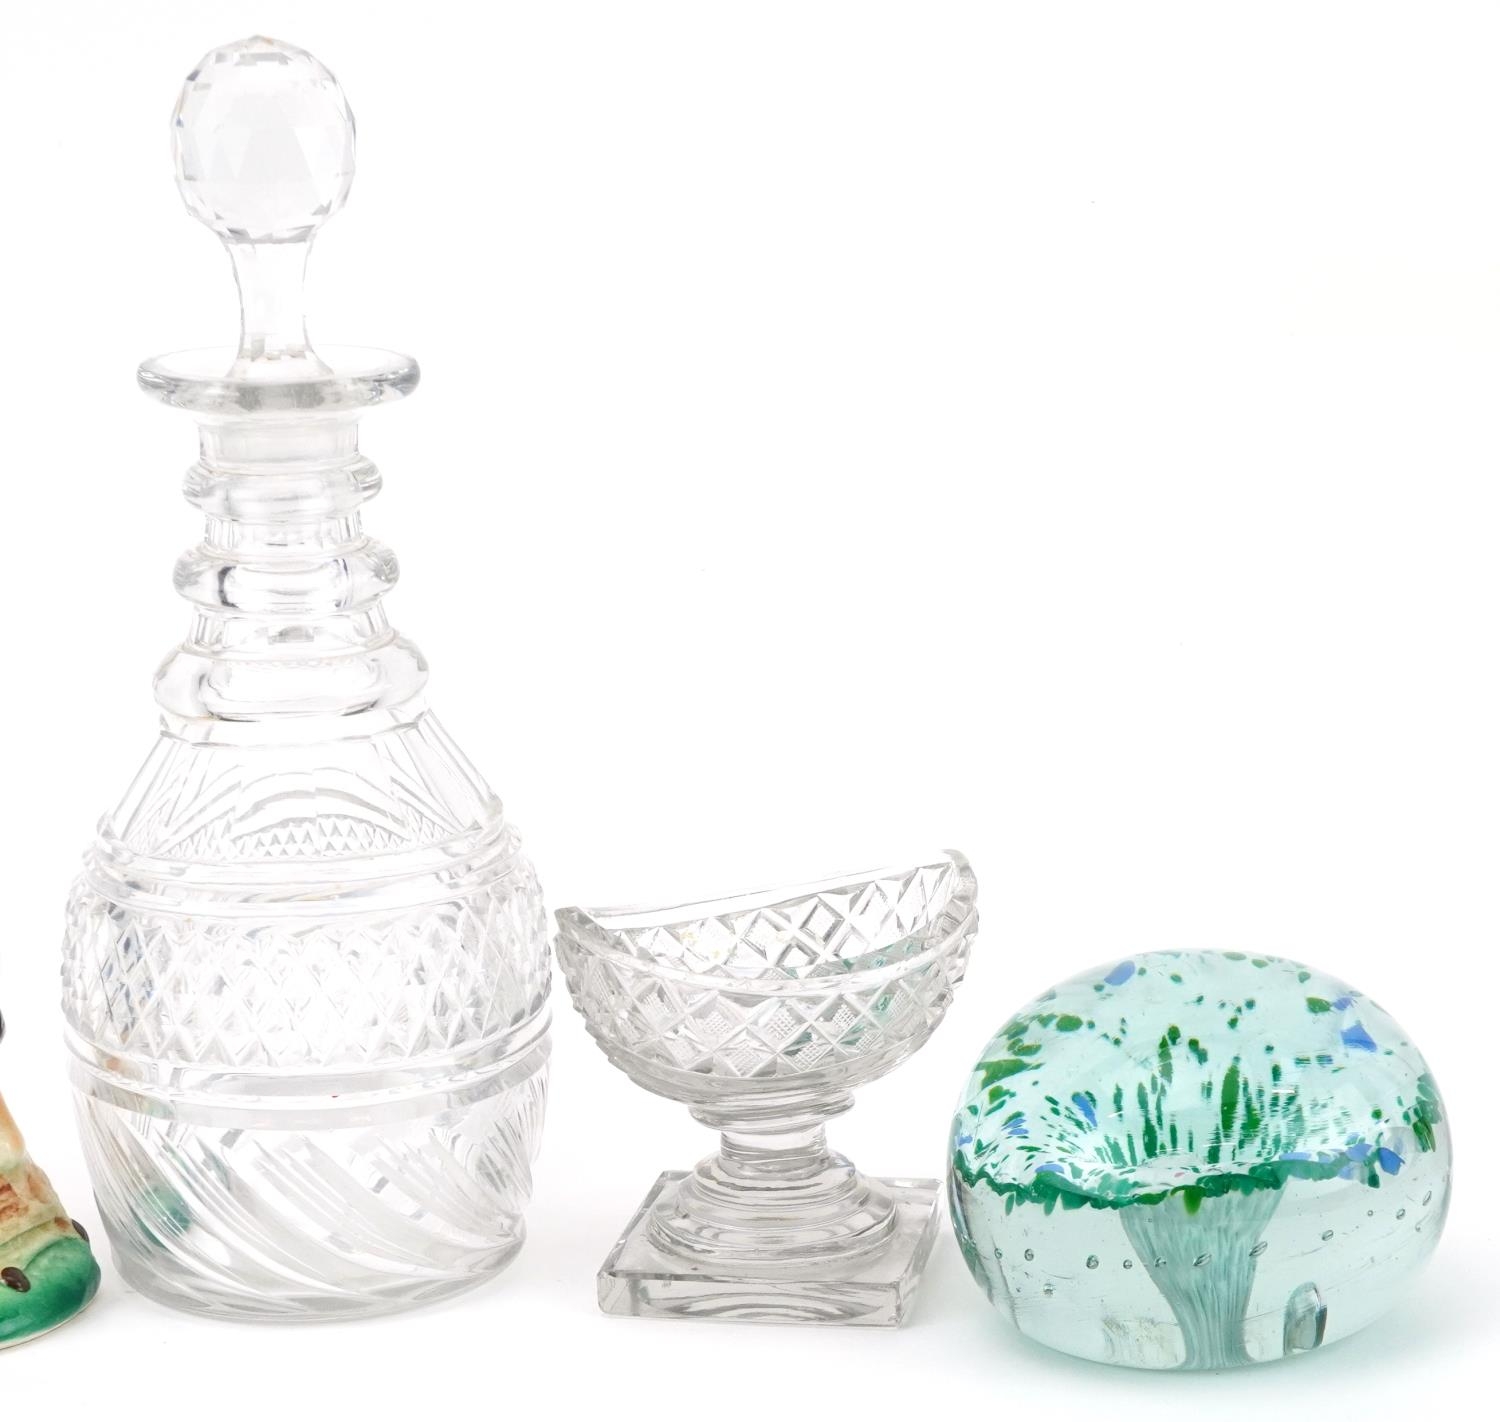 19th century and later ceramics and glassware including a Georgian three ringed decanter, bisque - Image 3 of 5